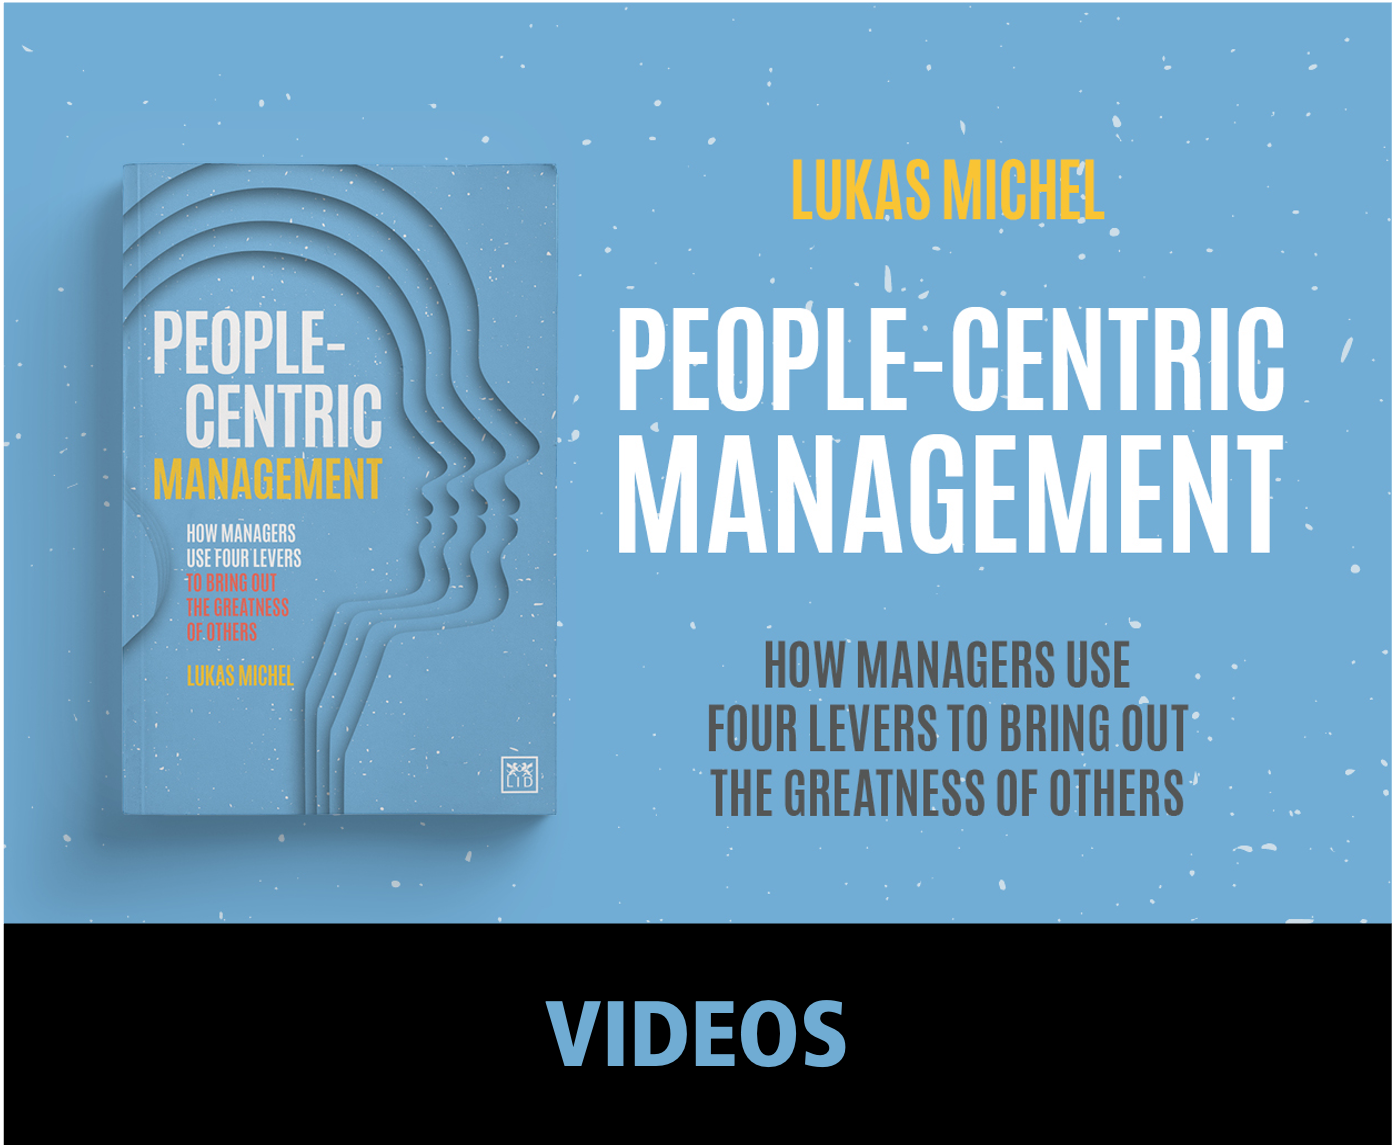 People-Centric Management: An Introduction